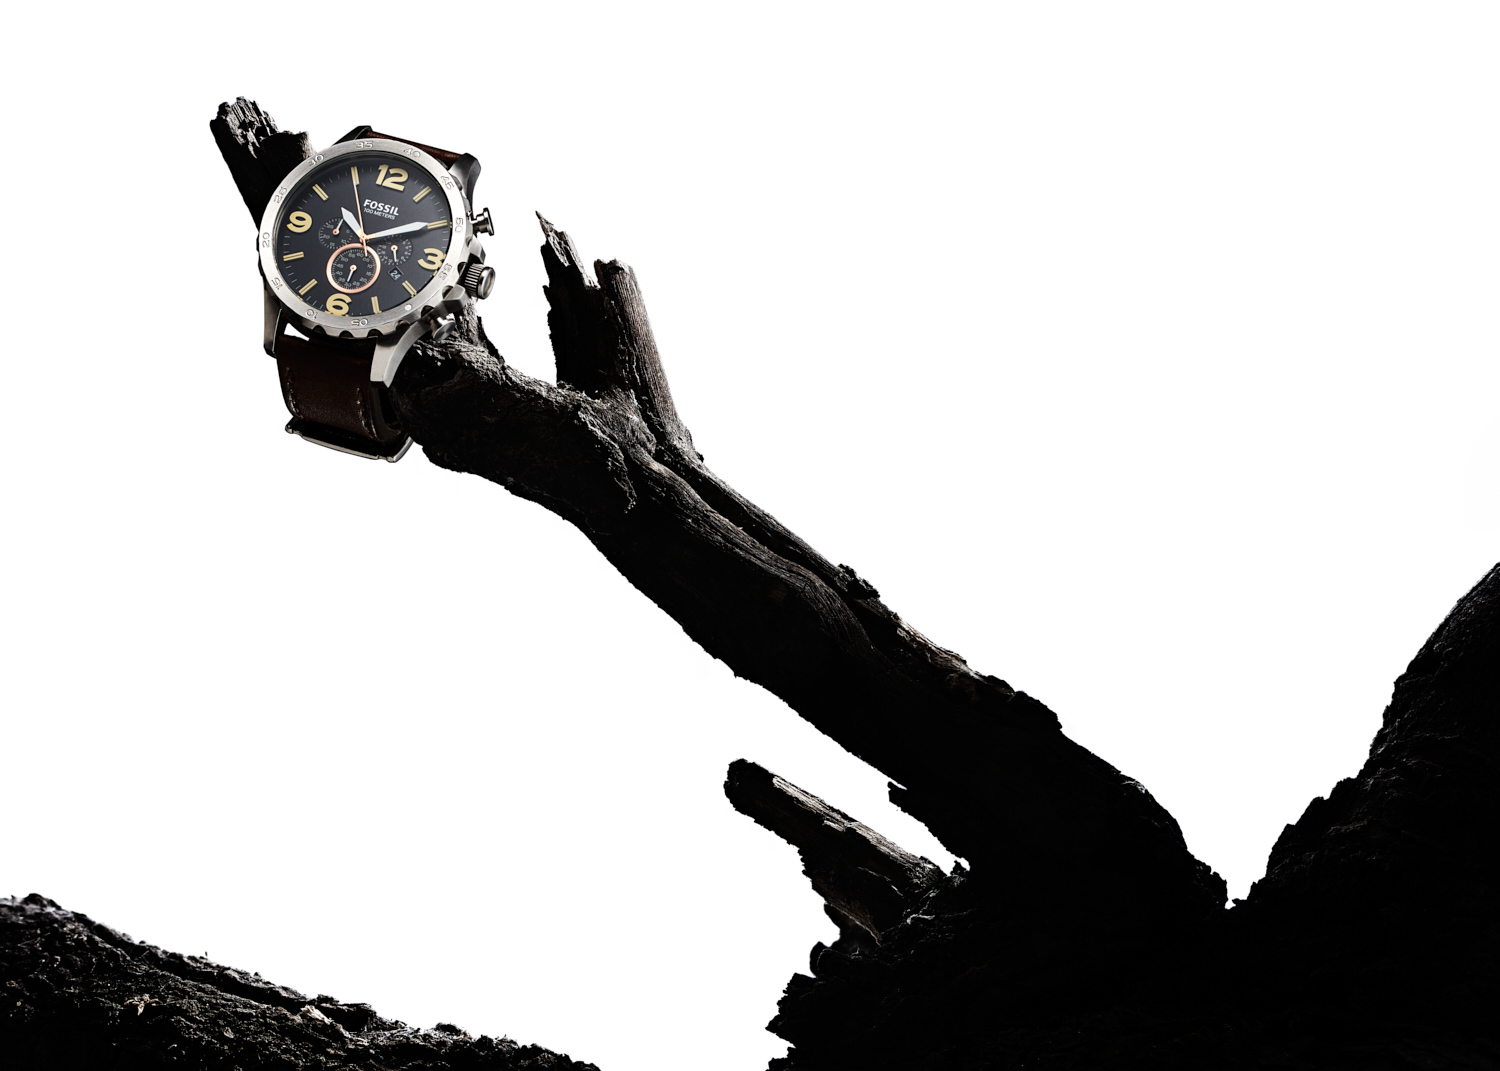 Fossil Brand Watch on a charcoal wood